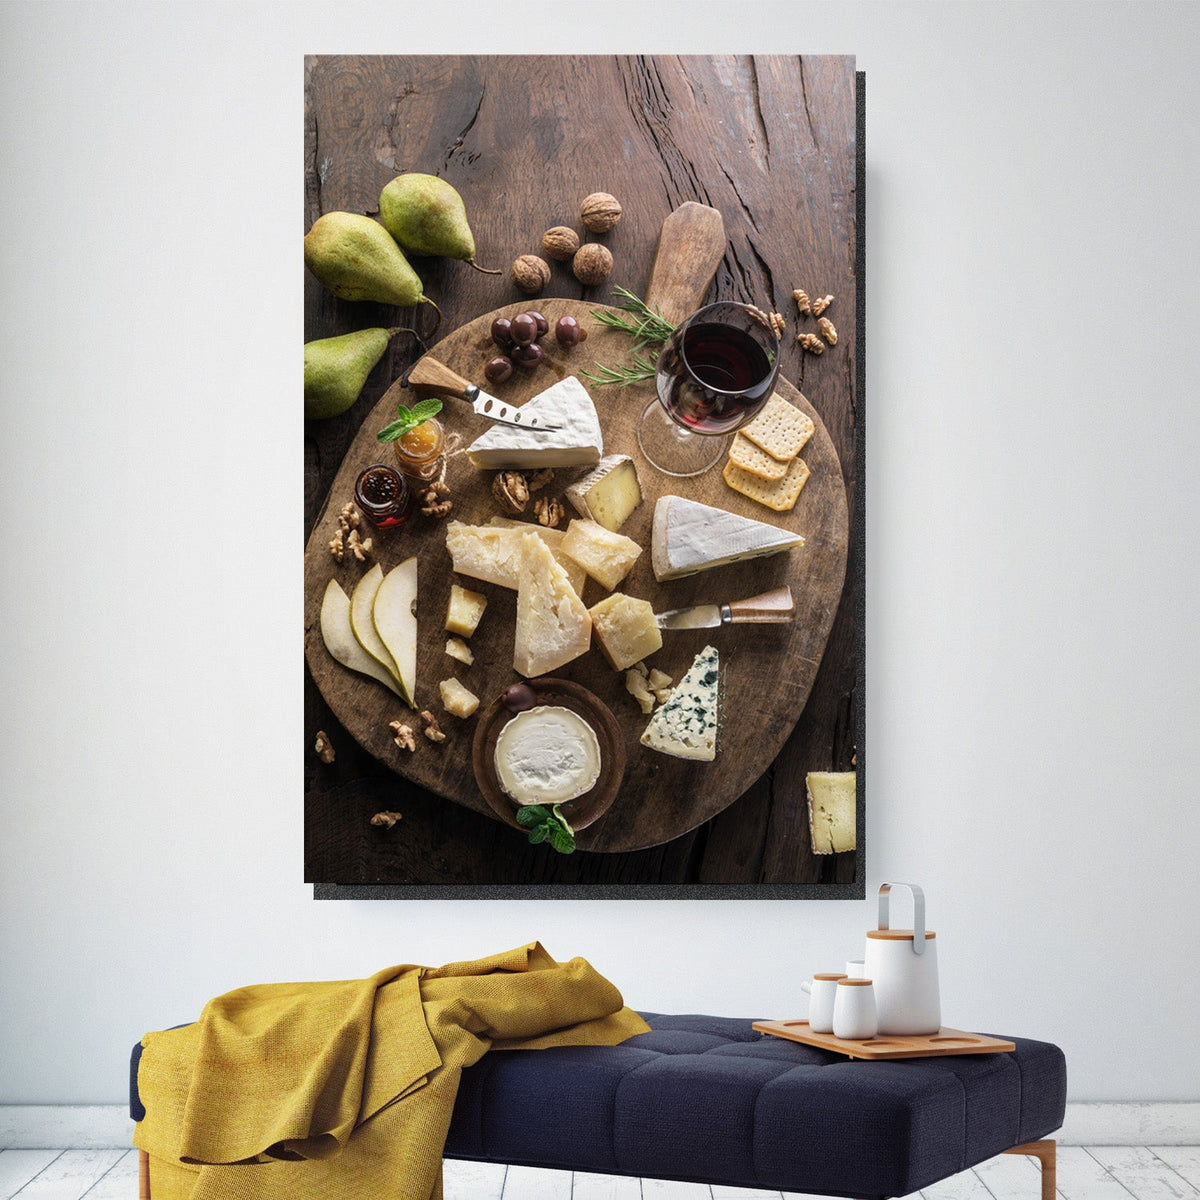 https://cdn.shopify.com/s/files/1/0387/9986/8044/products/FineWineandCheesePlatterCanvasArtprintStretched-3.jpg